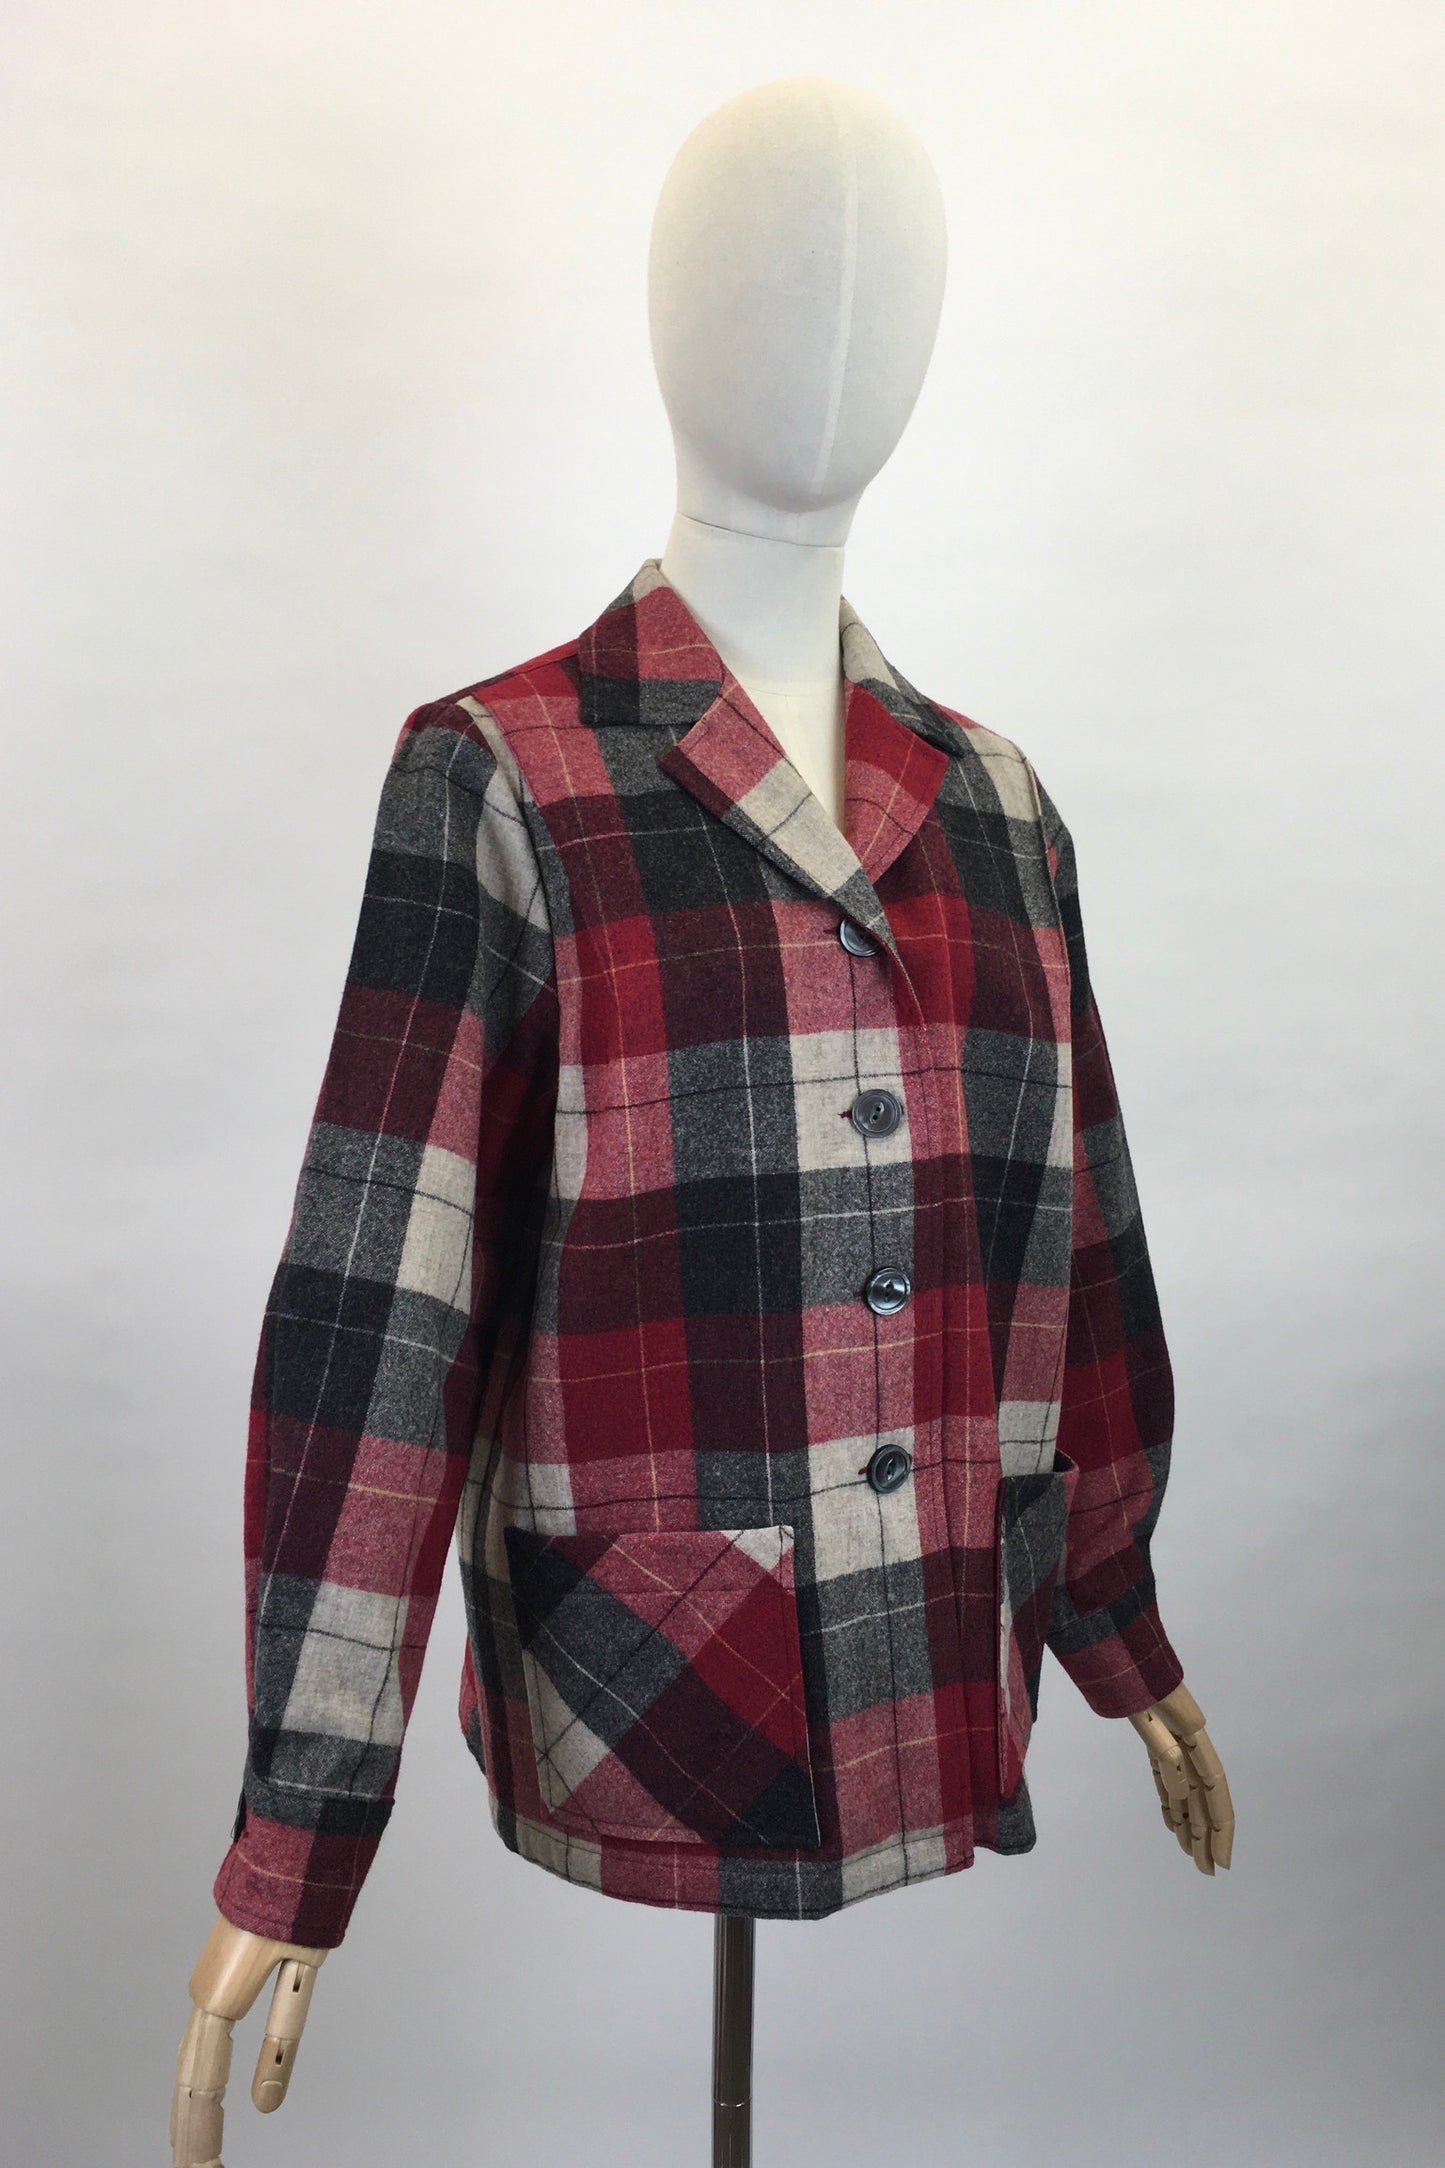 Original 1960’s Pendleton Check Jacket - In Lovely Warm Reds, Black’s and Ivories